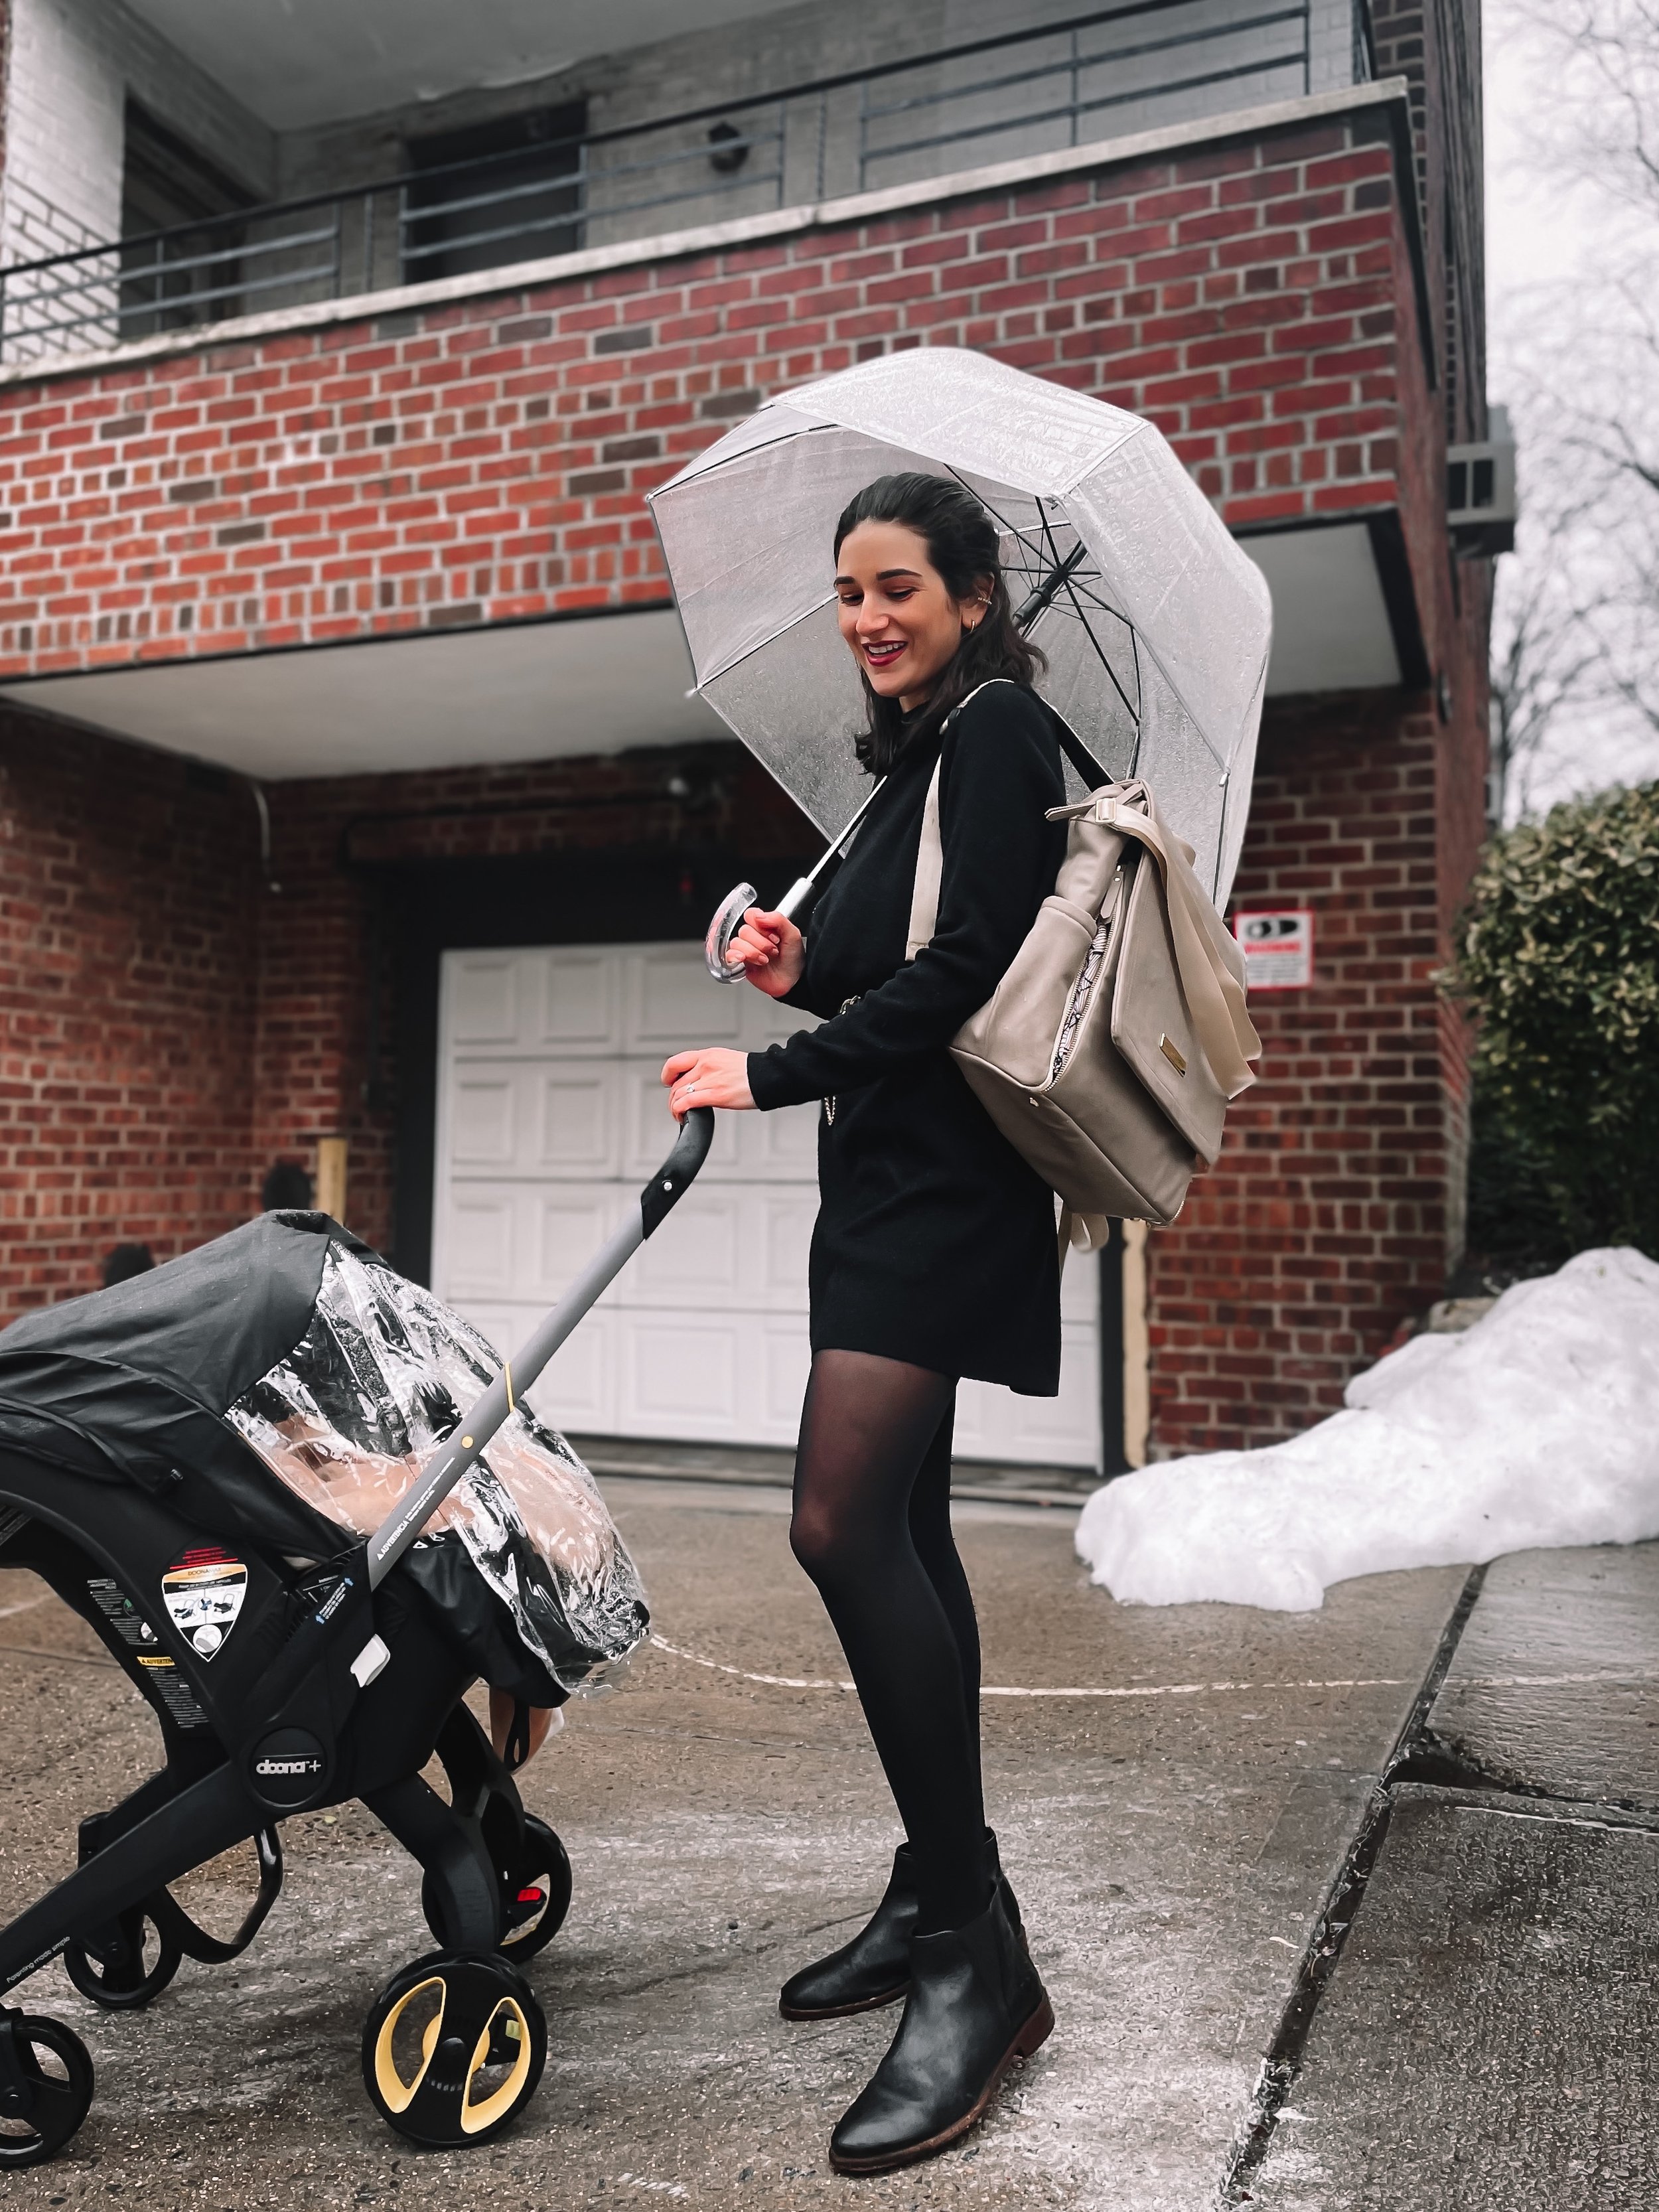 My Favorite Diaper Bags What I Pack In Them Esther Santer NYC Street Style Lifestyle Fashion Blogger Blog Motherhood Go To Best Products Buy Shop Recommendations Belt Bag Baby Babies First Time Mom Kibou Petunia Storq Essentials Changing Pad Checklist.jpg